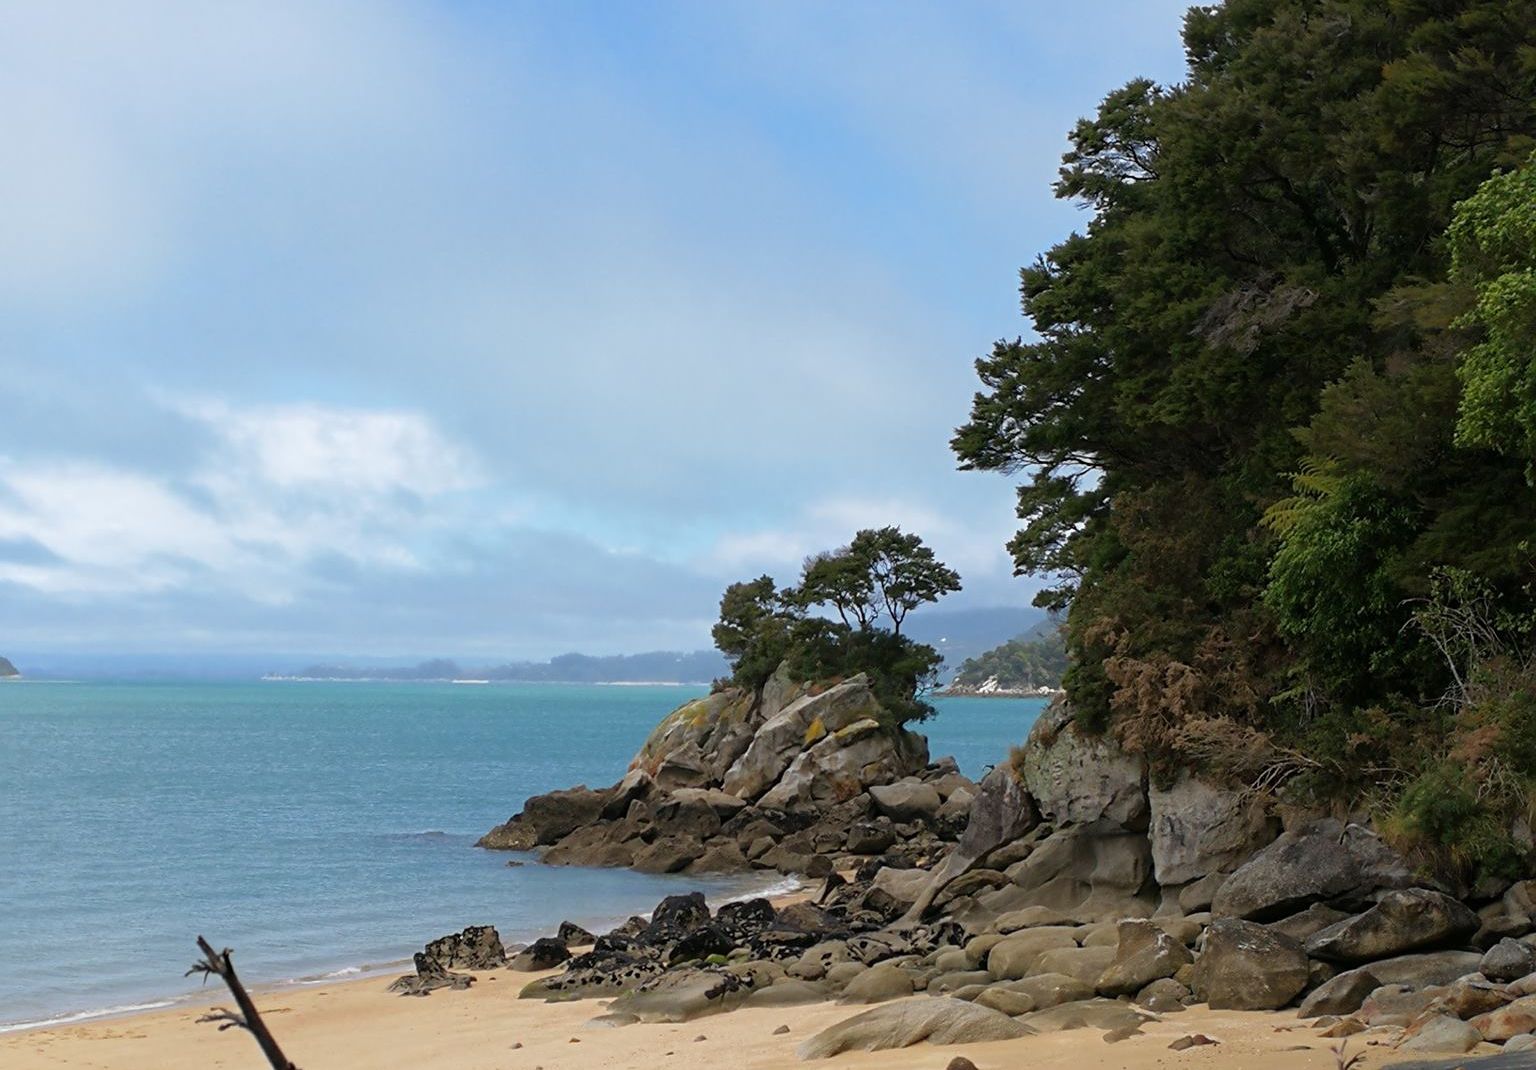 Abel Tasman National Park in the South Island of New Zealand